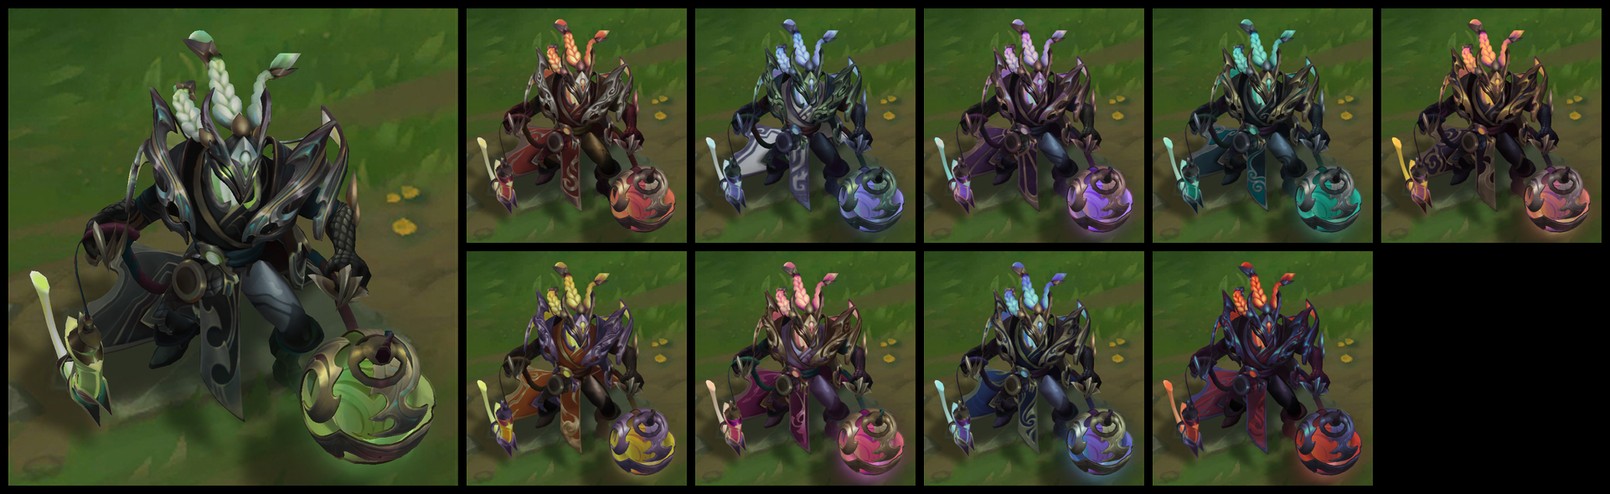 Thresh Skins: The best skins of Thresh (with Images)